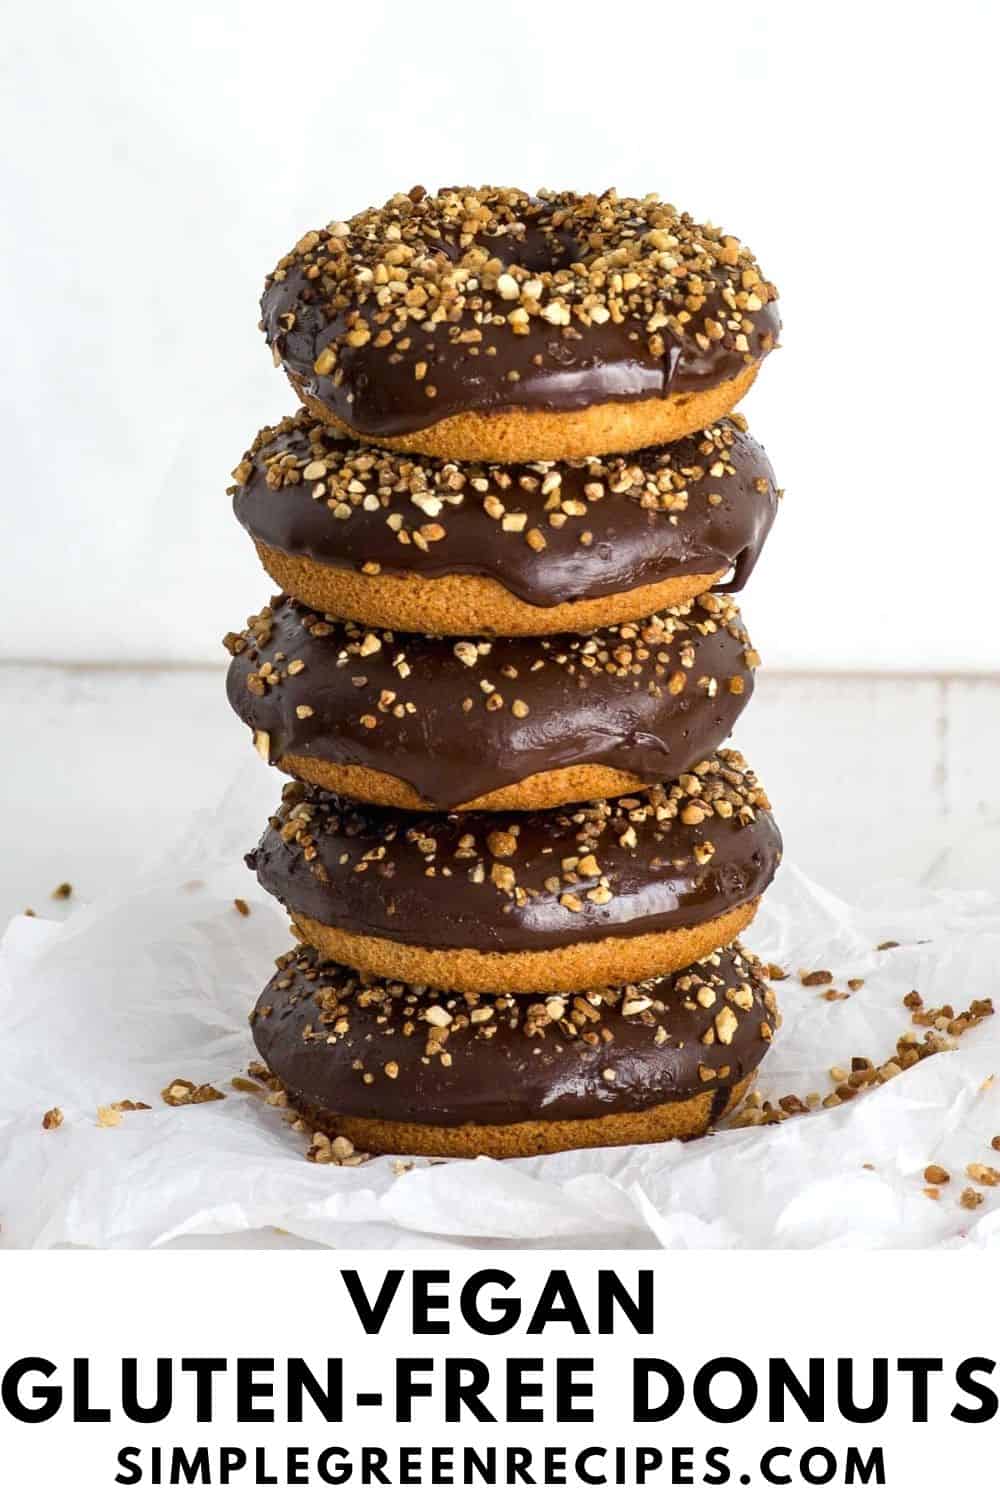 stack of baked donuts topped with chocolate frosting and crunchy almonds